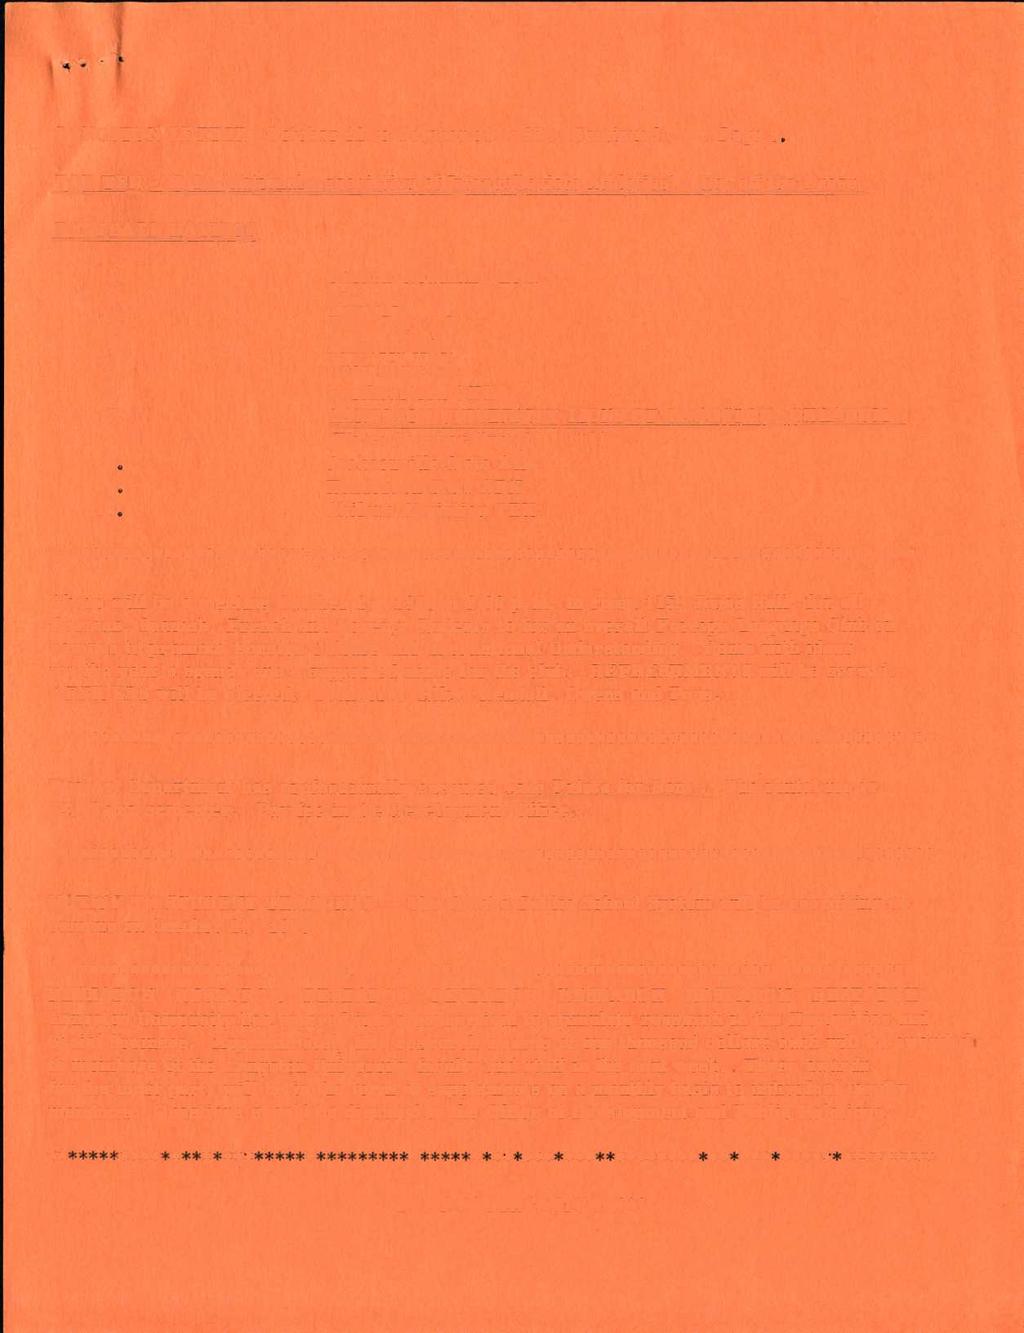 LANGSTON LETTER, October 12 to October 18, 1973, Continued... Page 3, TOP TEN - NAIA (National Association of Intercollegiate Athletics) - Hot off the Press FOOTBALL RATINGS 1. 2. 3. 4. 5." 5. 7.